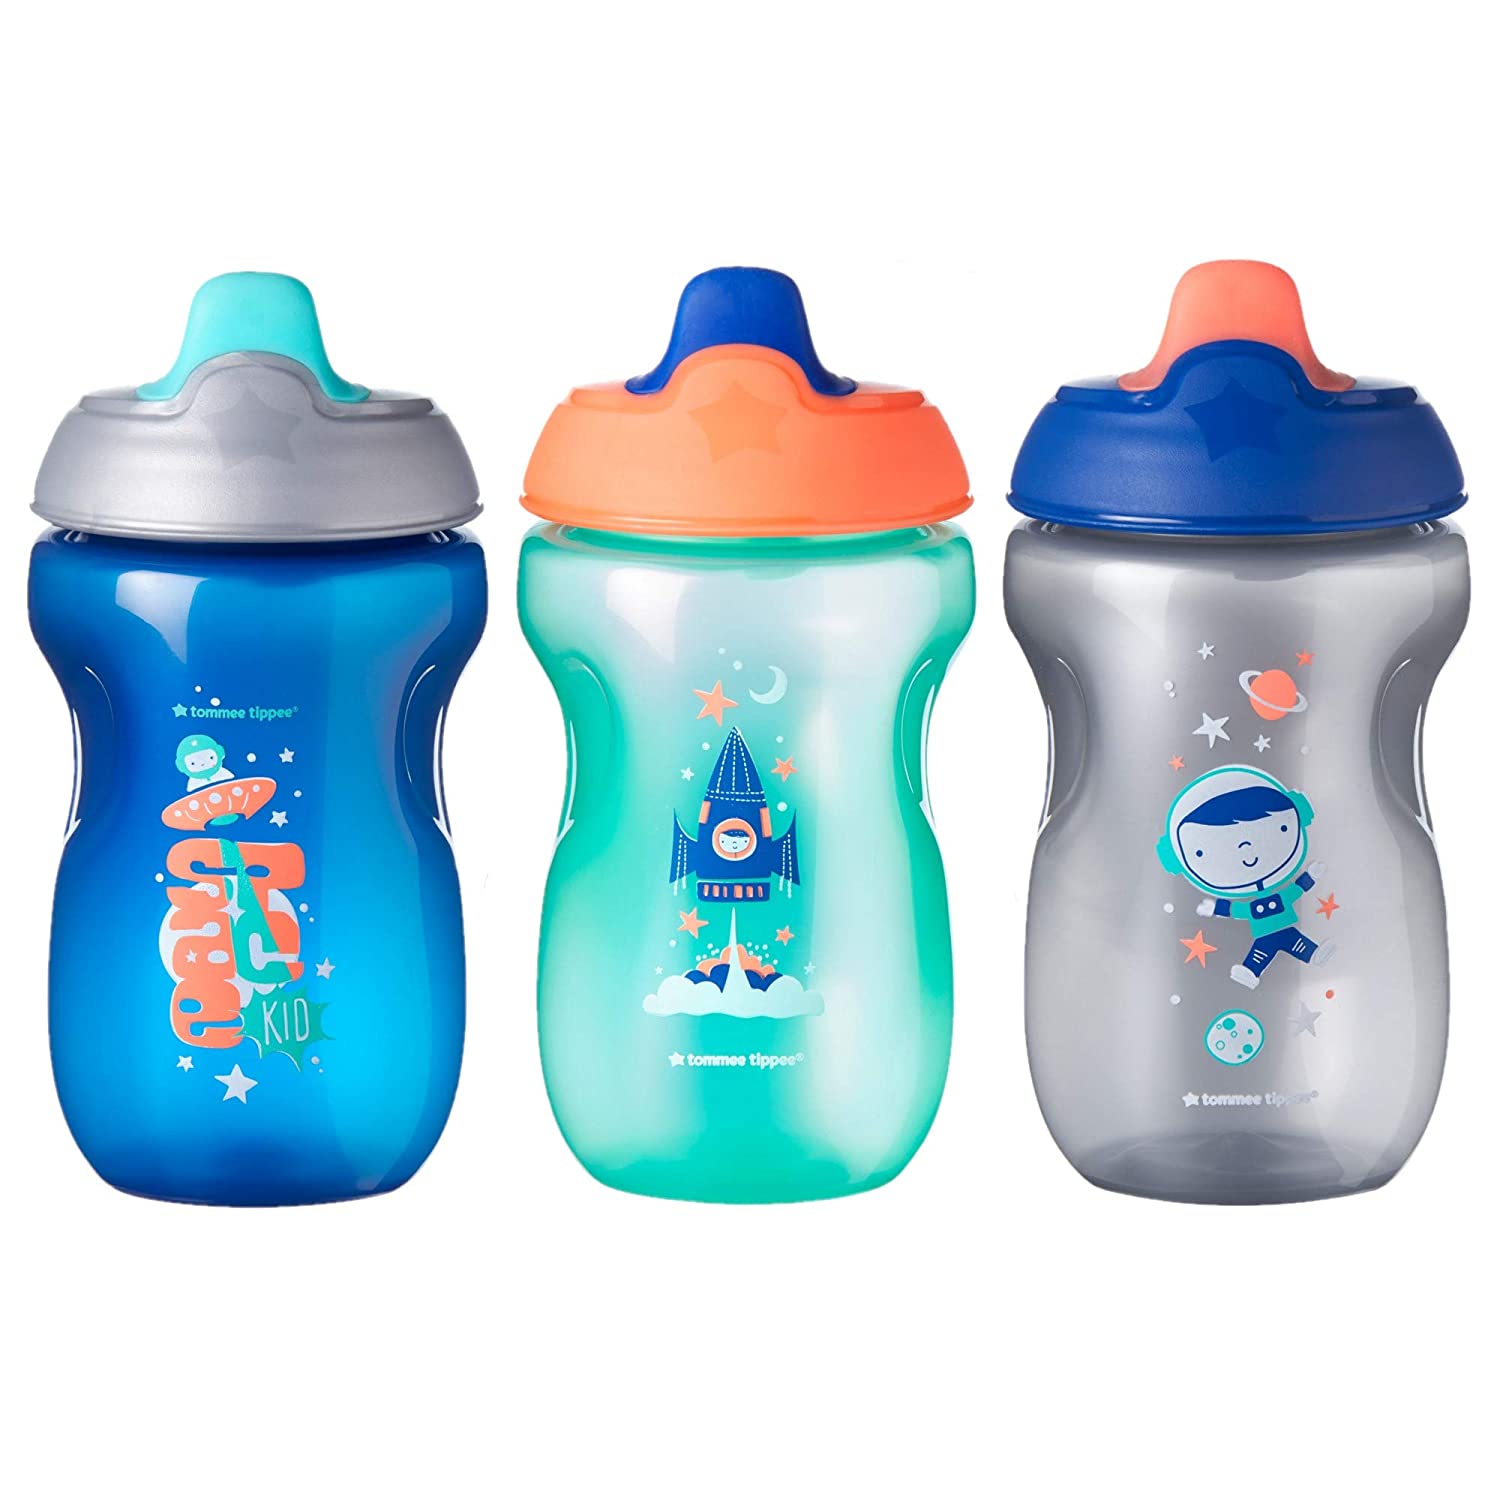 Tommee Tippee Non-Spill Toddler Sippee Cup, 9+ Months, 10 Oz, 3 Count, Boy, Gray, Blue and Green